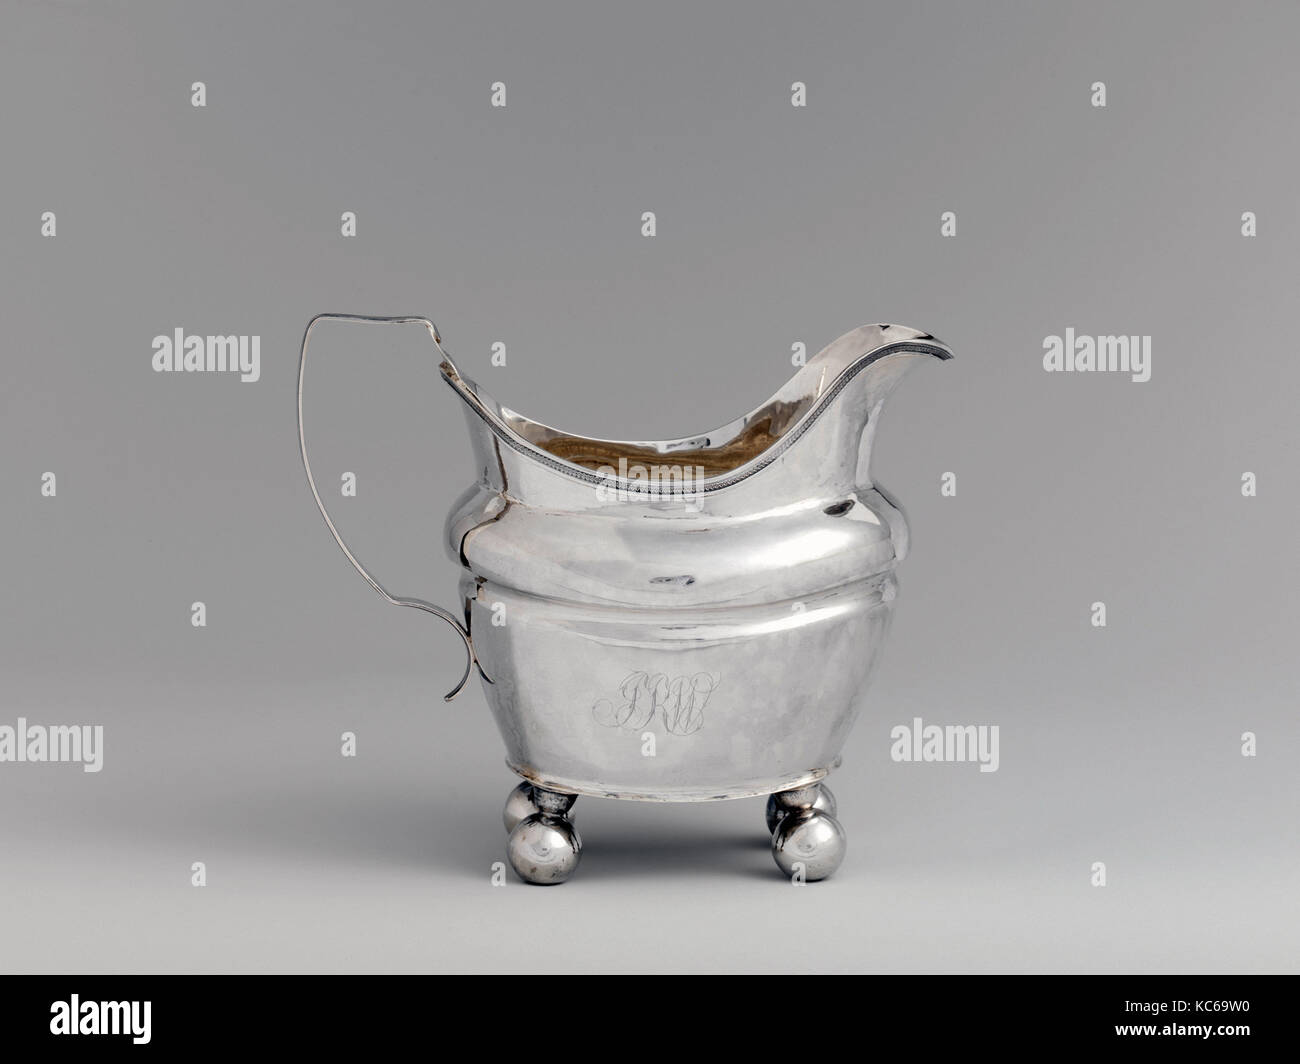 Creamer, 1810–30, Made in Albany, New York, United States, American, Silver, 5 1/2 x 6 5/8 in. (14 x 16.8 cm); 7 oz. 17 dwt. (24 Stock Photo